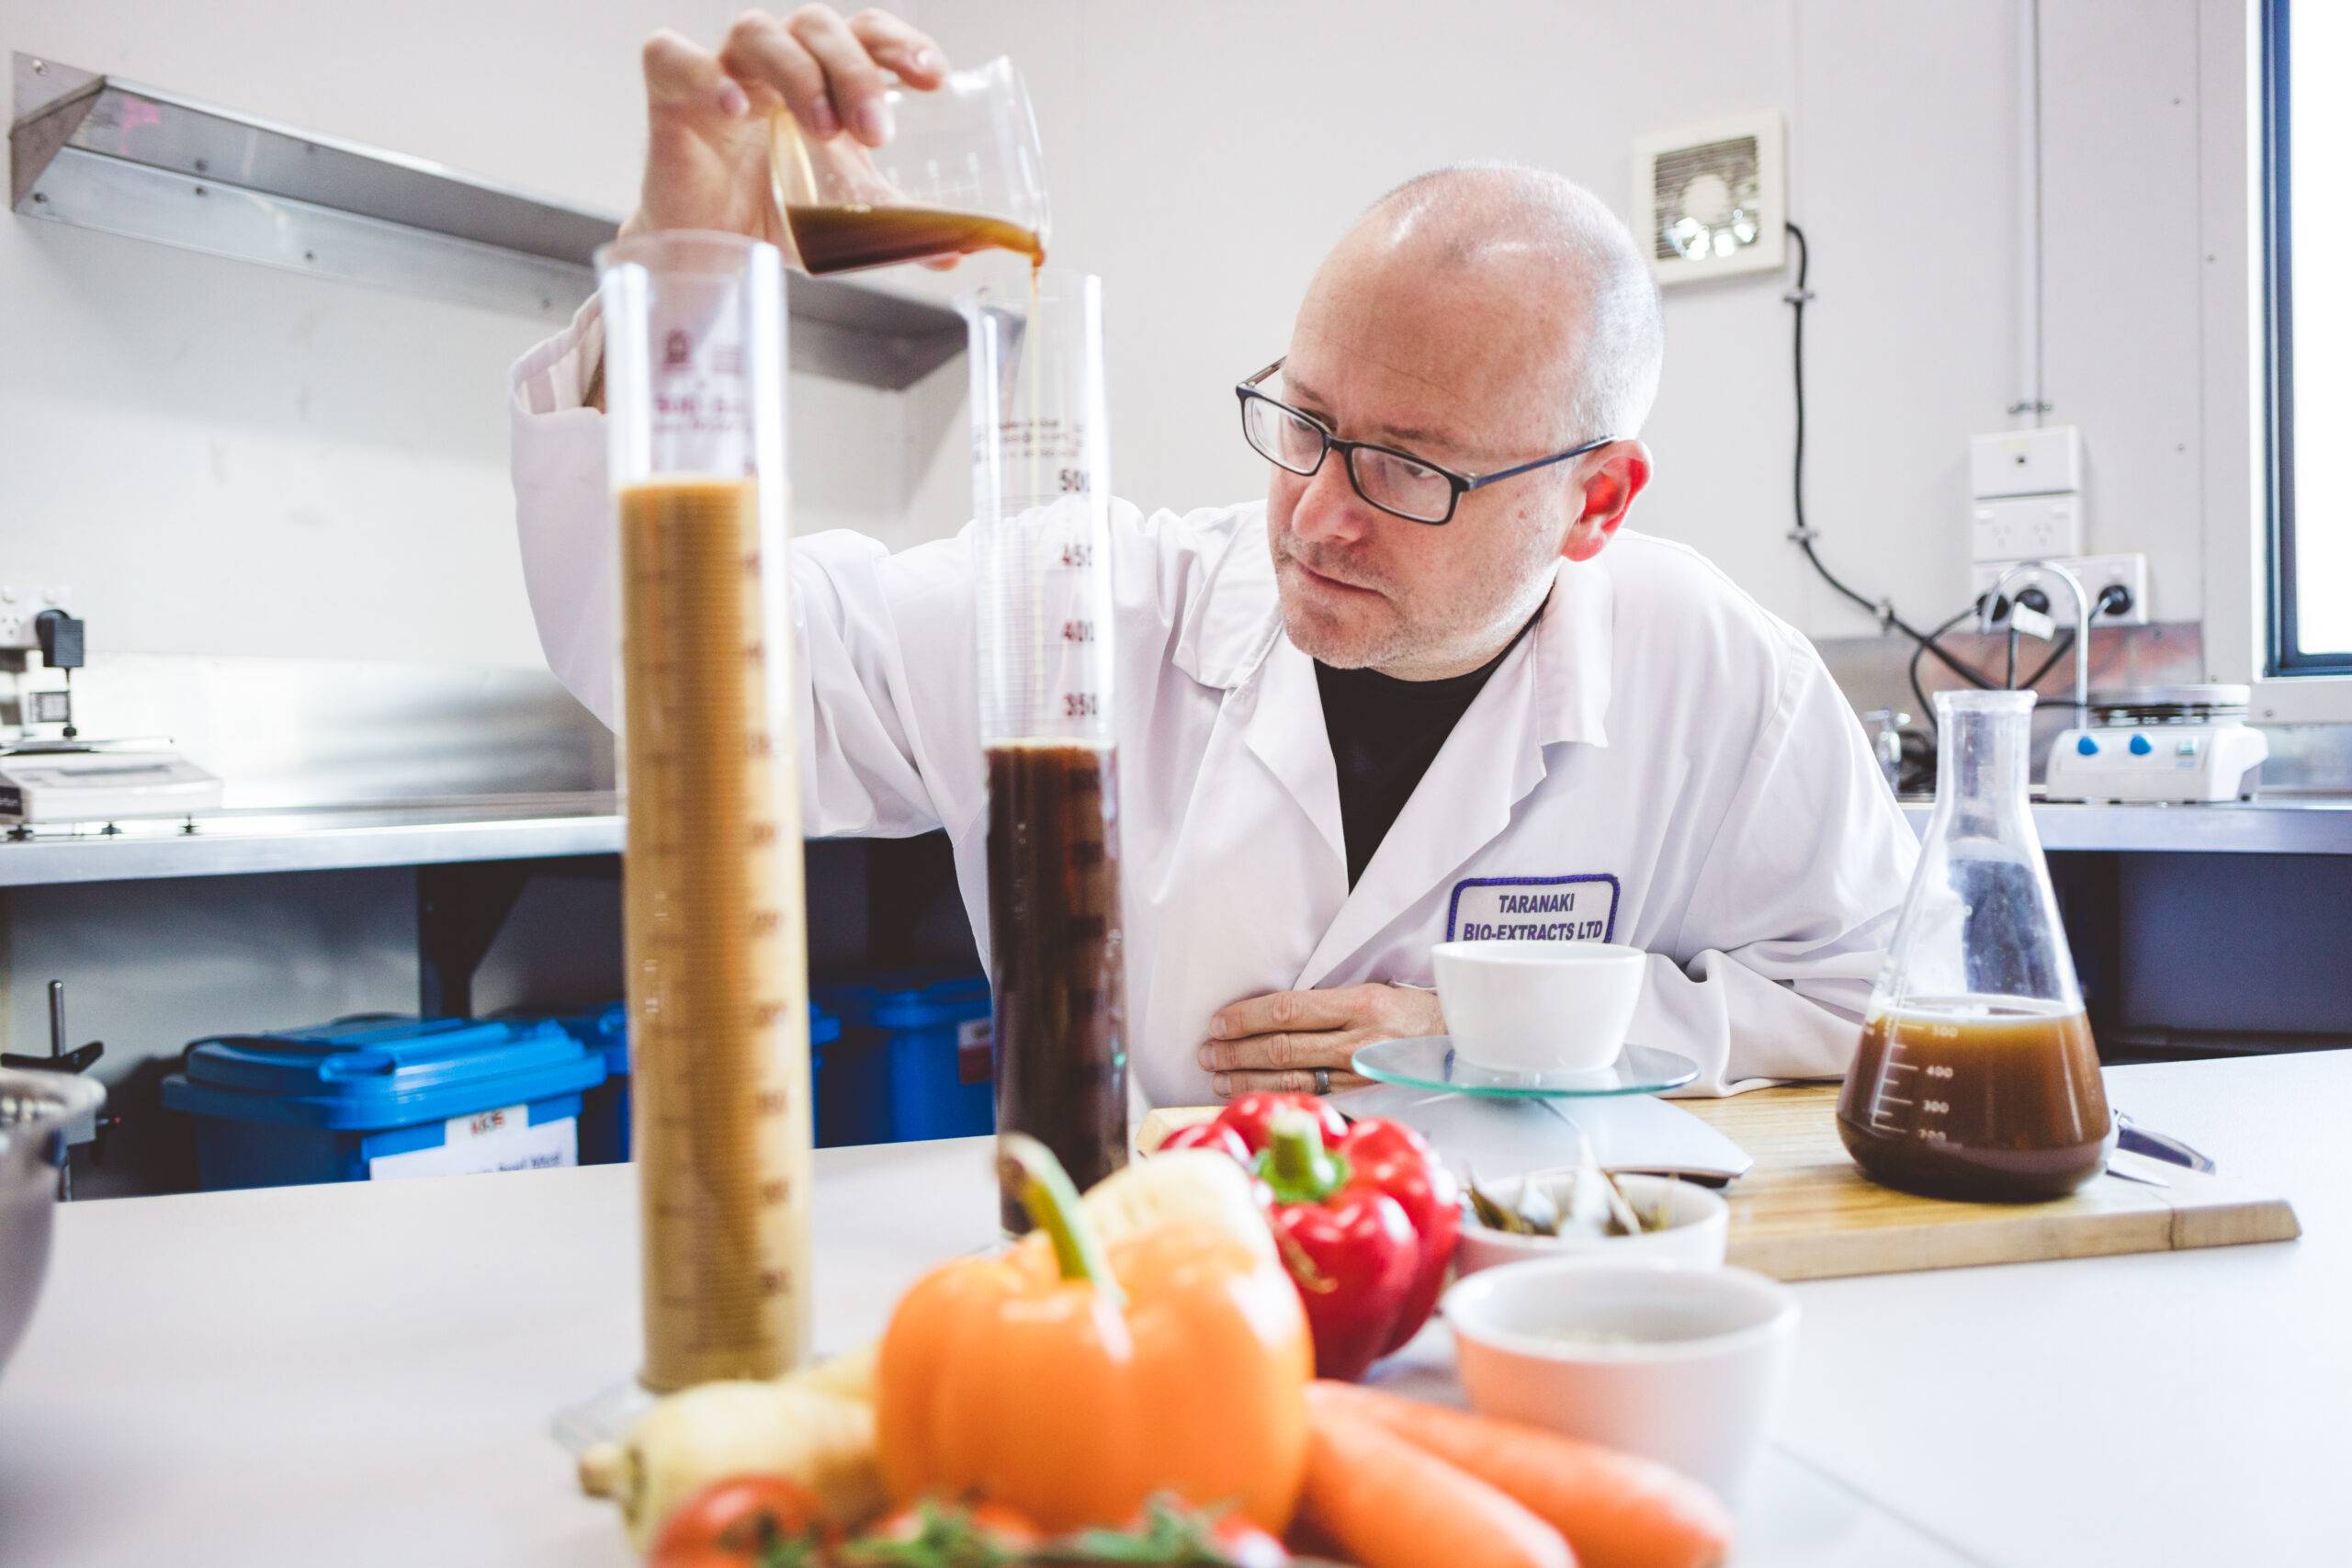 Taranaki Bio-Extracts' Food Engineer doing food research with beef bone broth and extracts